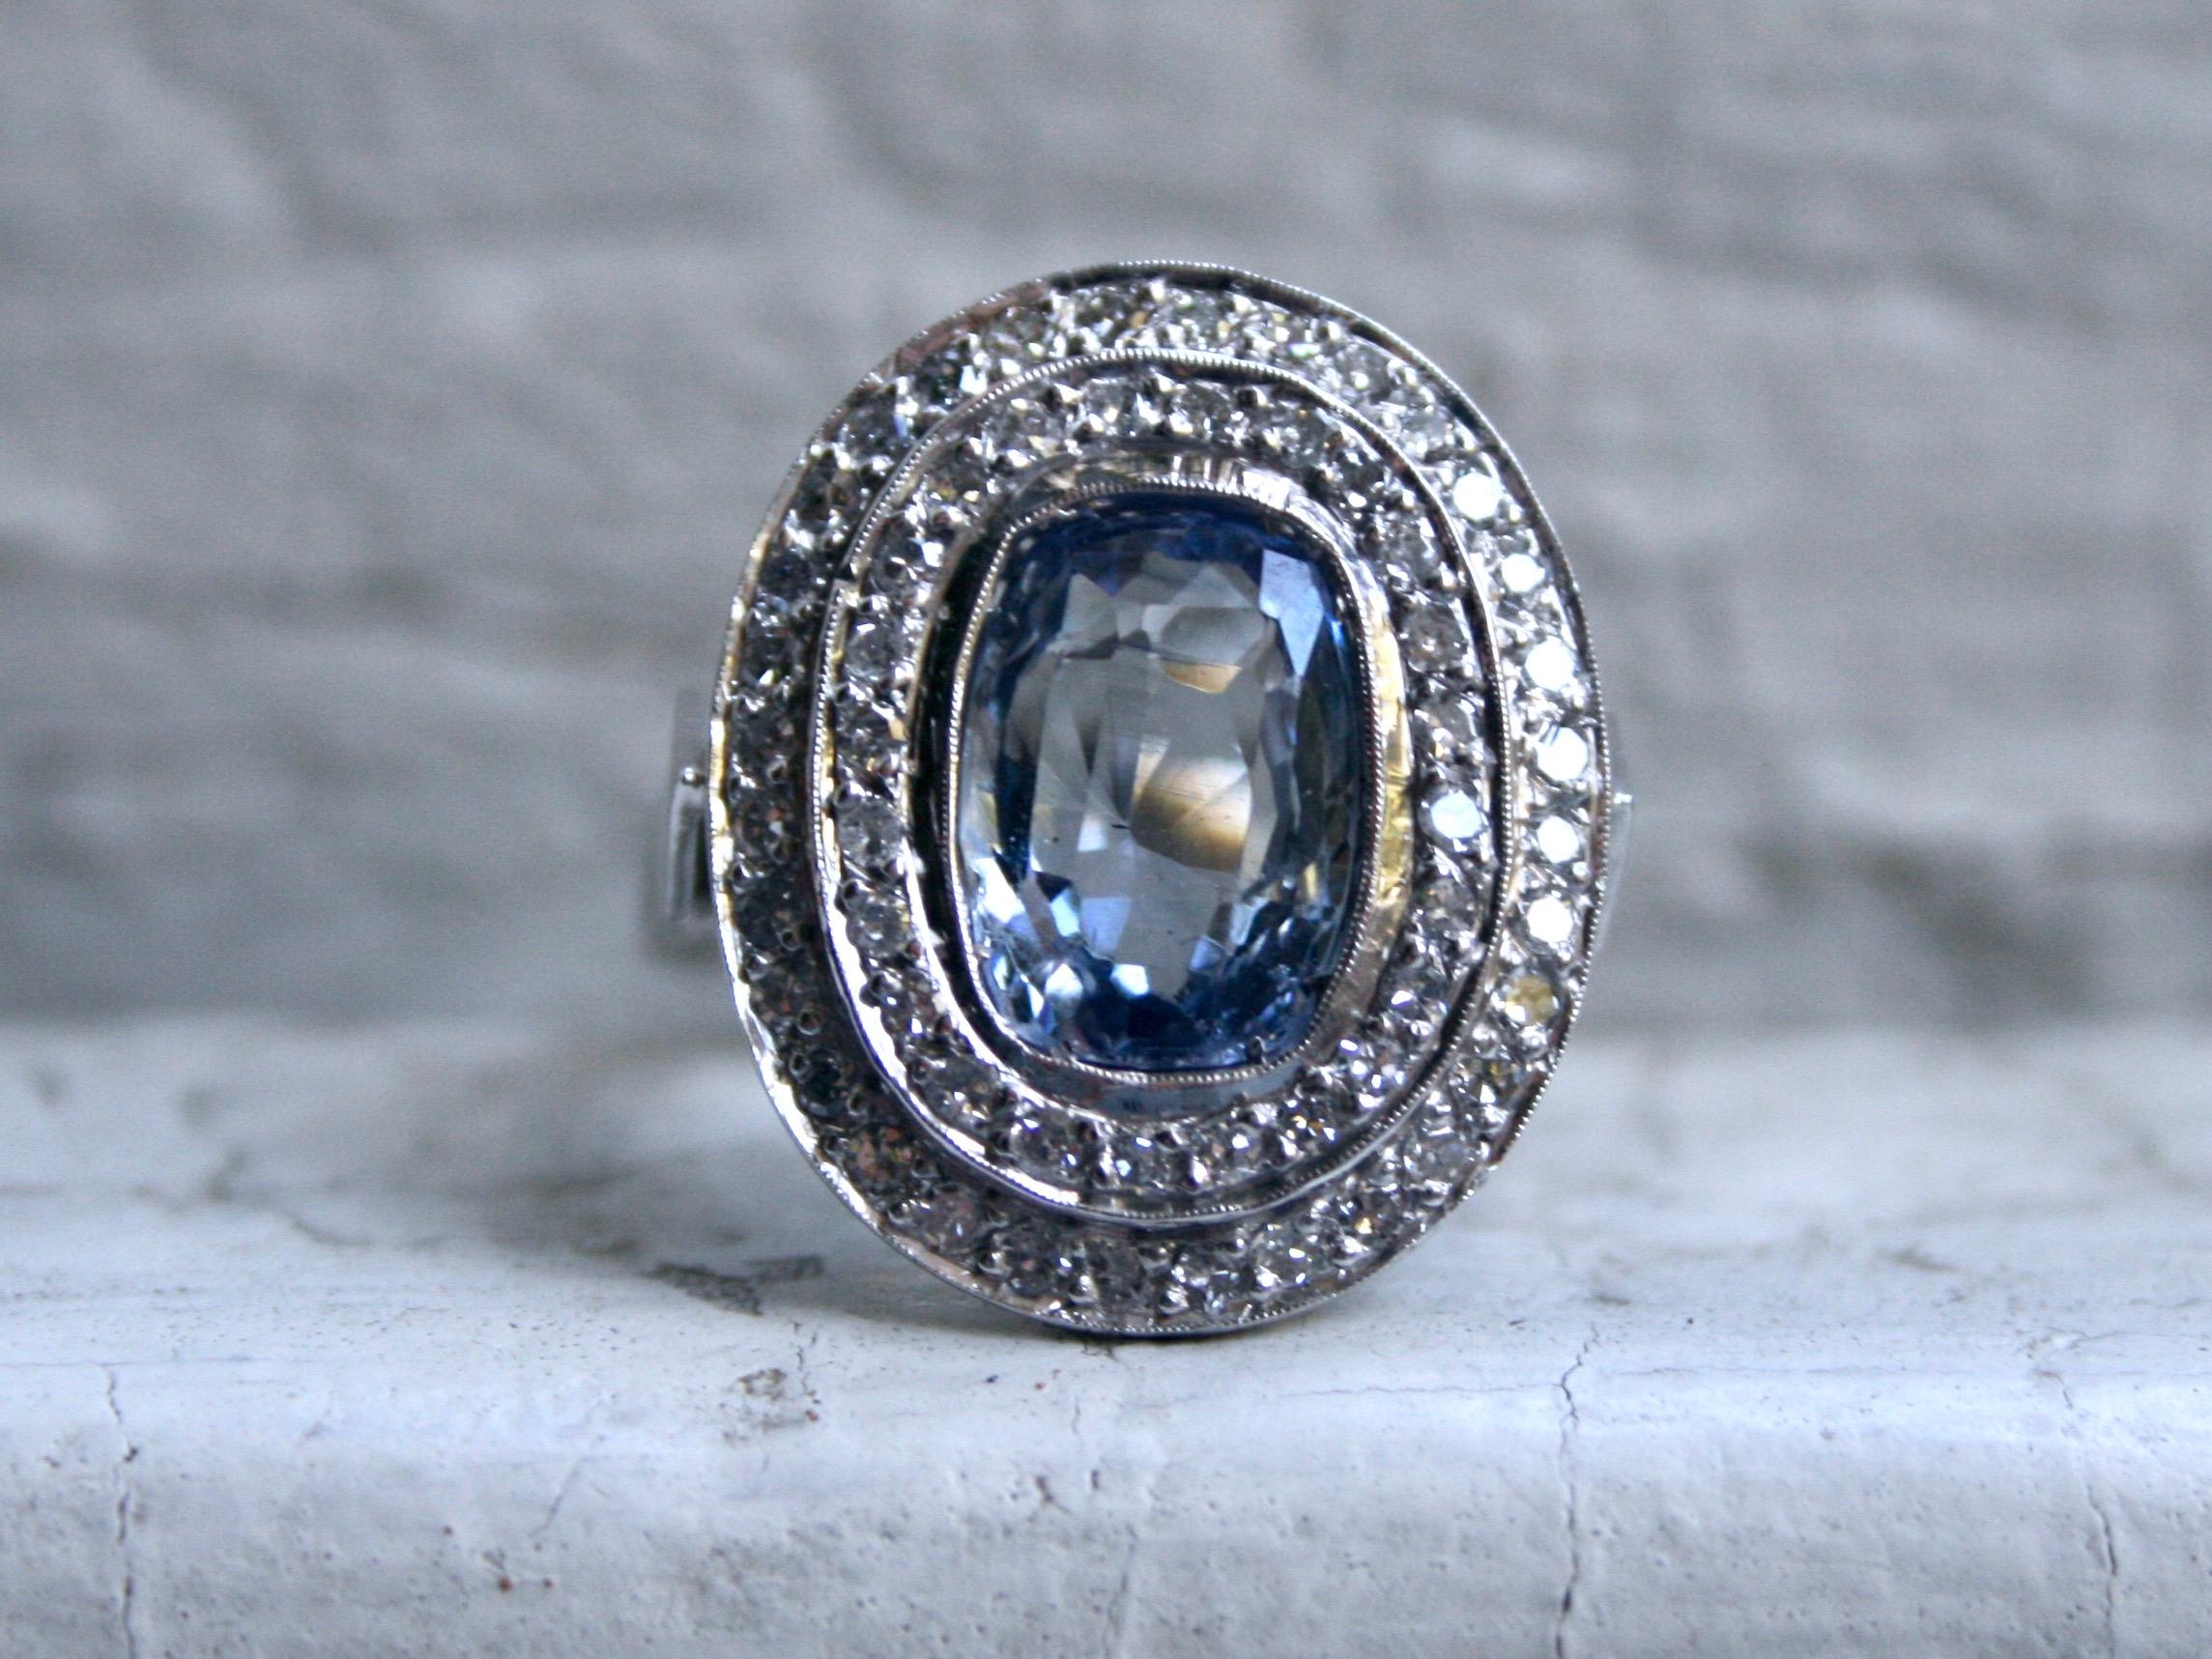 This Vintage Double Diamond Halo and Sapphire Ring is so stunning I'm temped to keep it for myself. The size, the sparkle, the antique styling - this ring has it all!! And despite the current popularity of the halo style, it's a design that's been